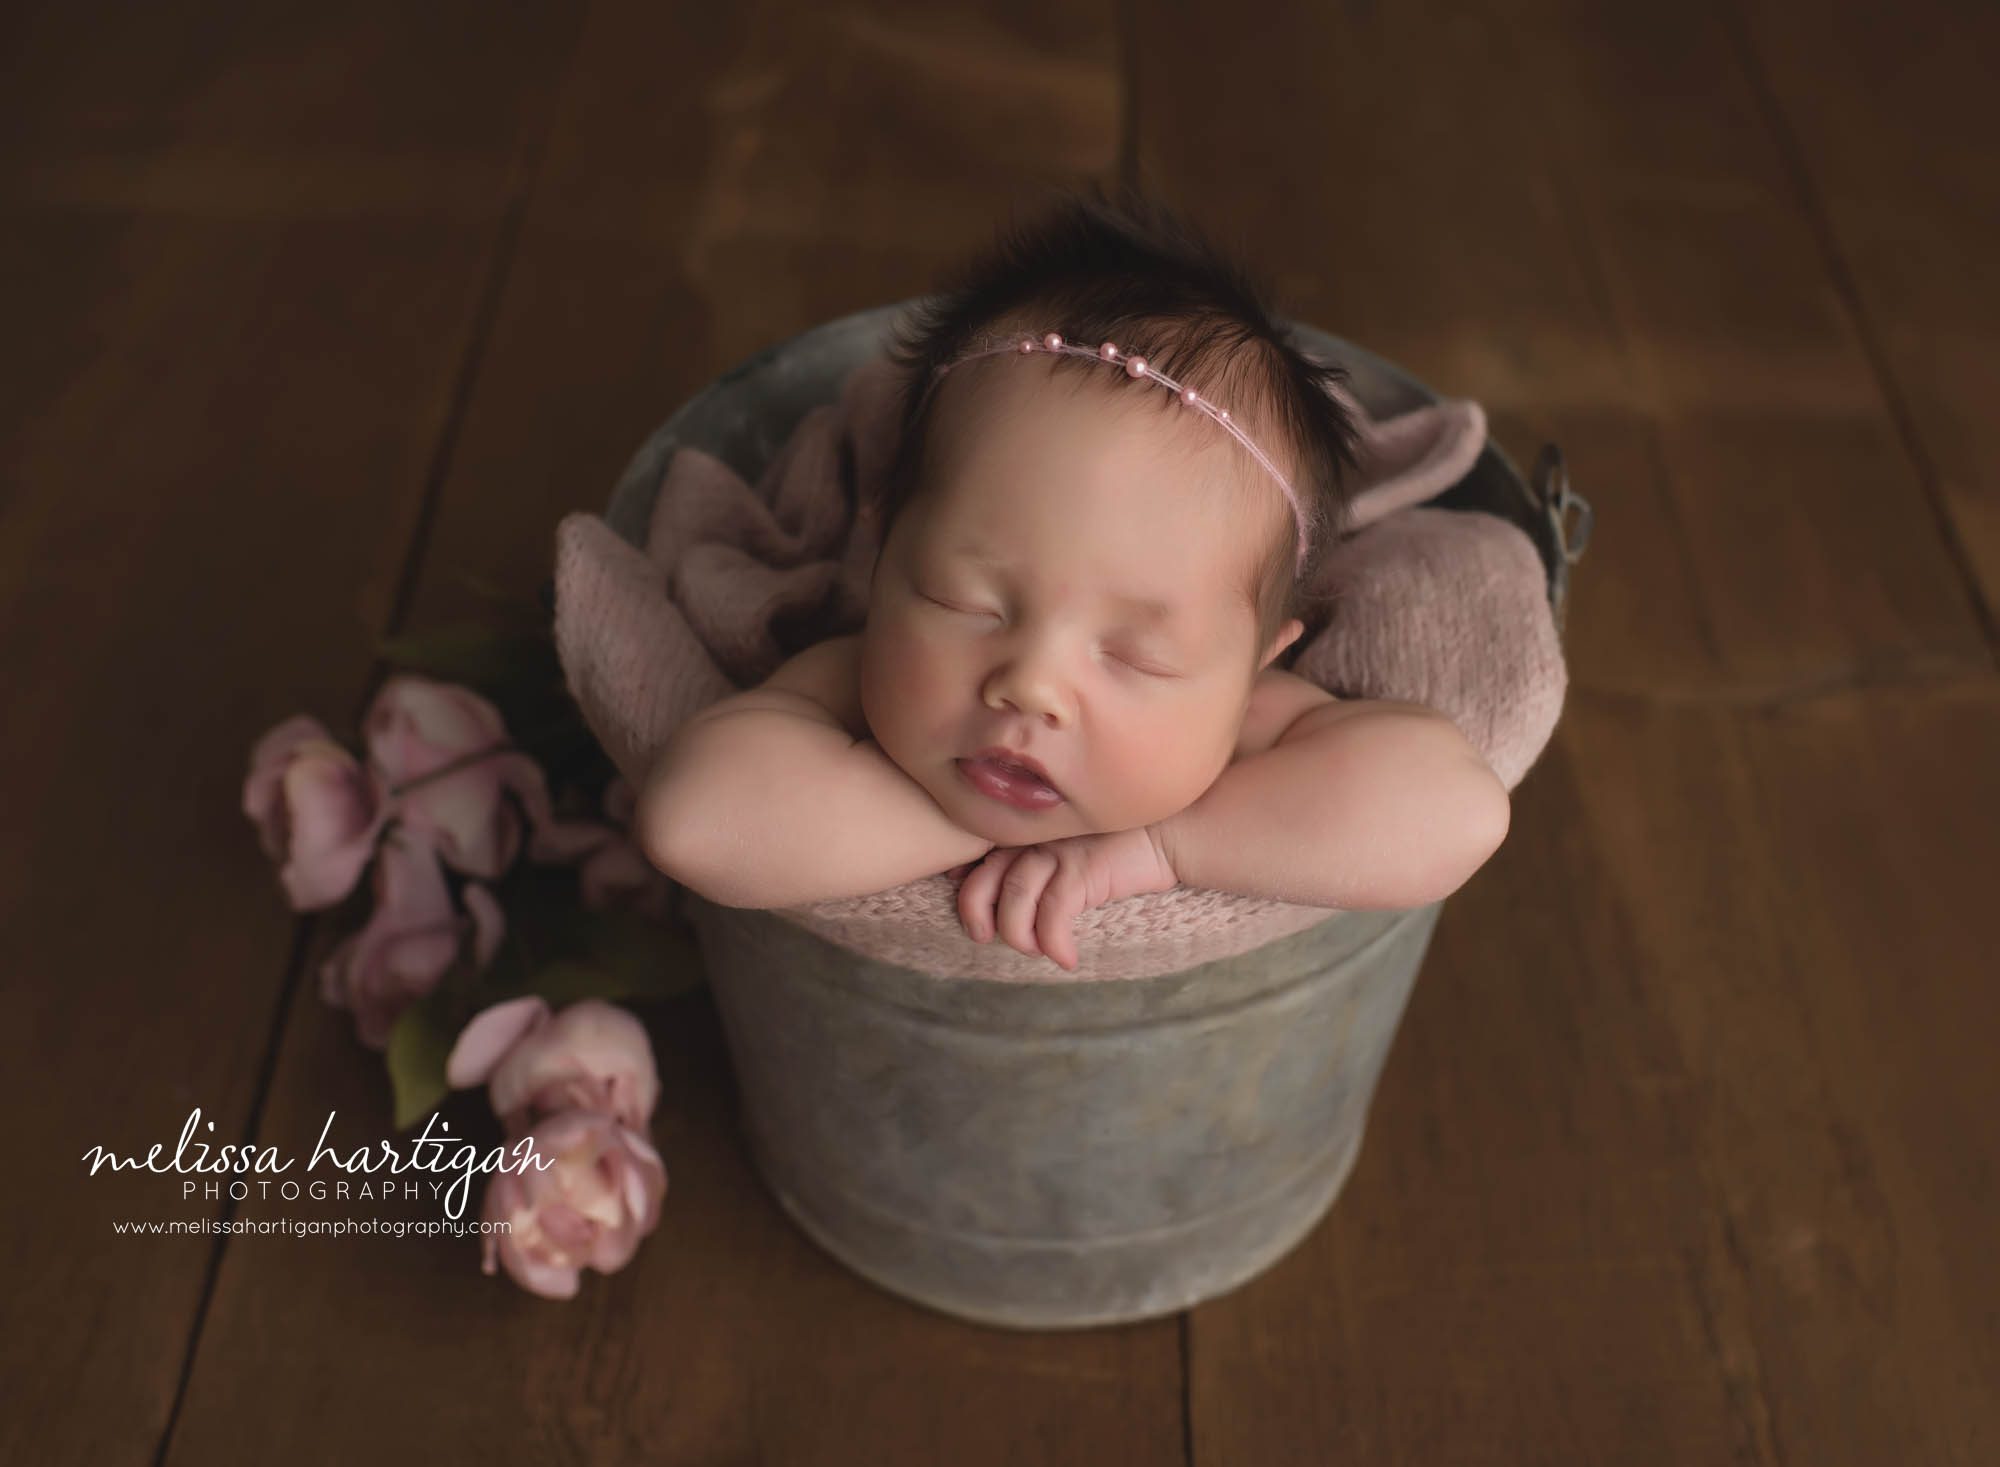 newborn baby girl posed in bucket with flower elements